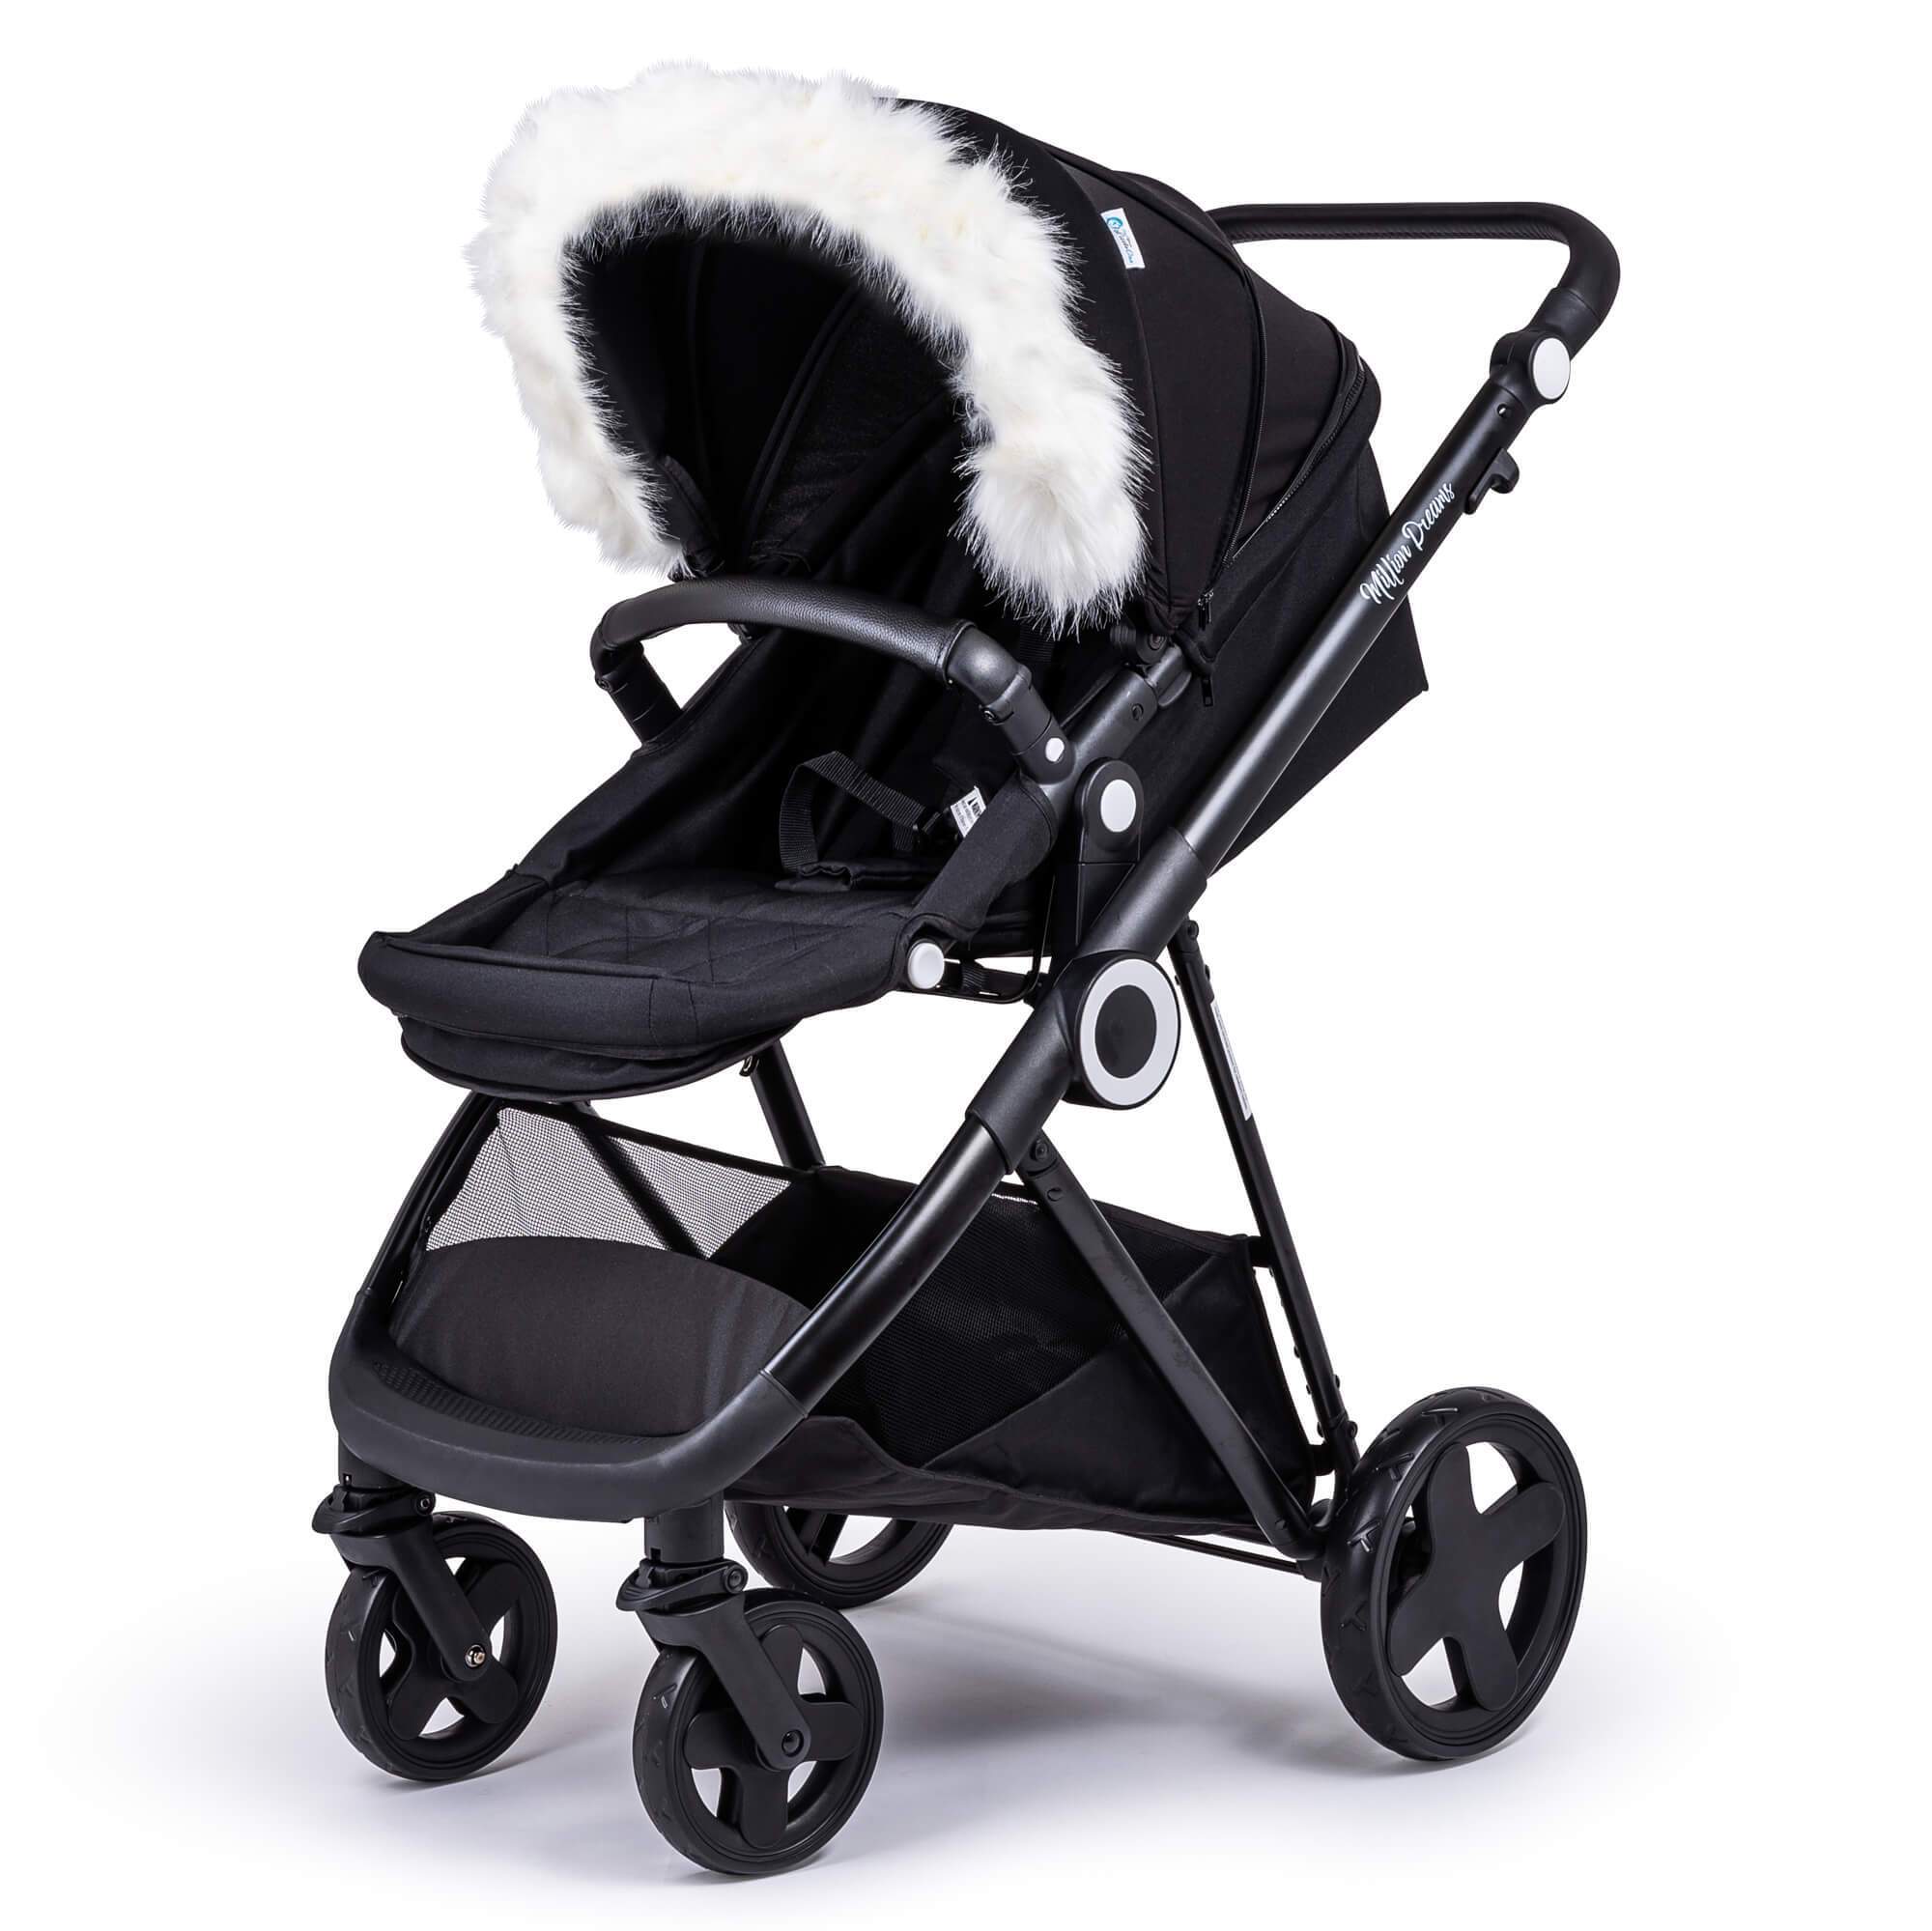 Pram Fur Hood Trim Attachment for Pushchair Compatible with BabyDan - White / Fits All Models | For Your Little One